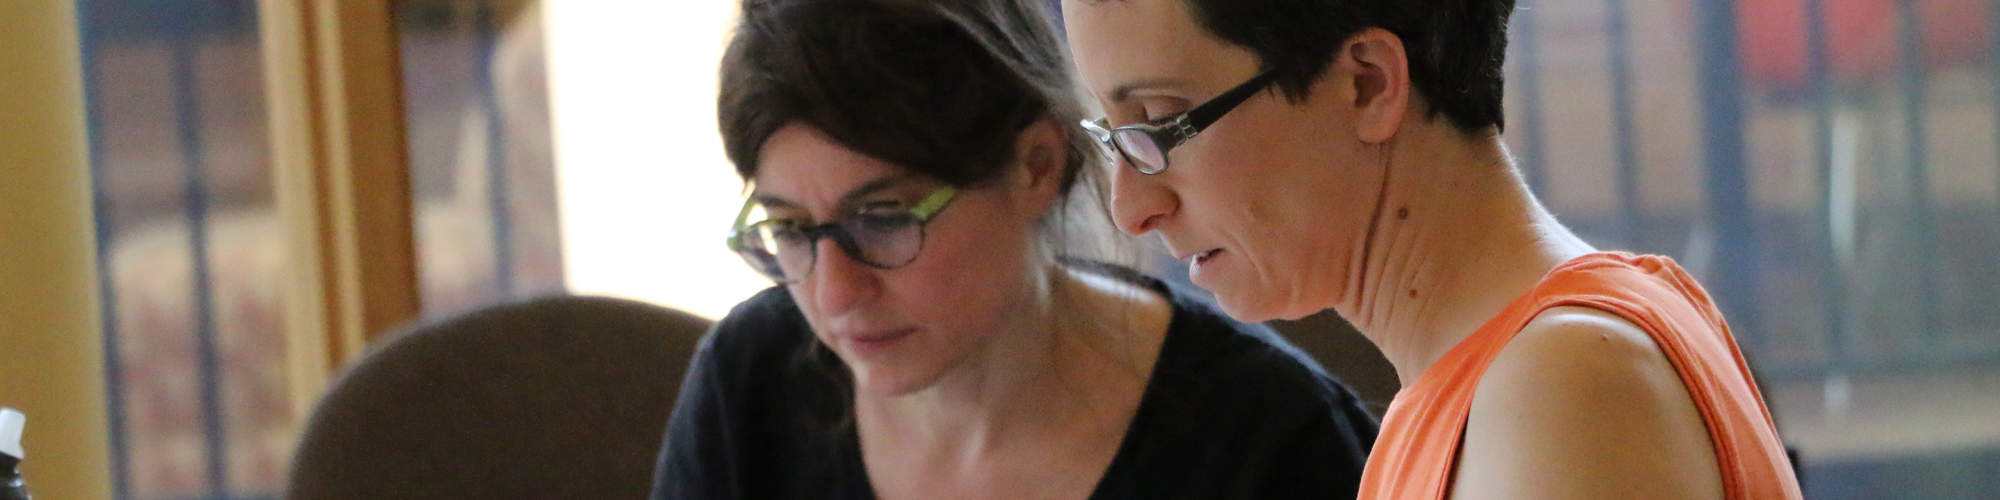 Two women reviewing documents together